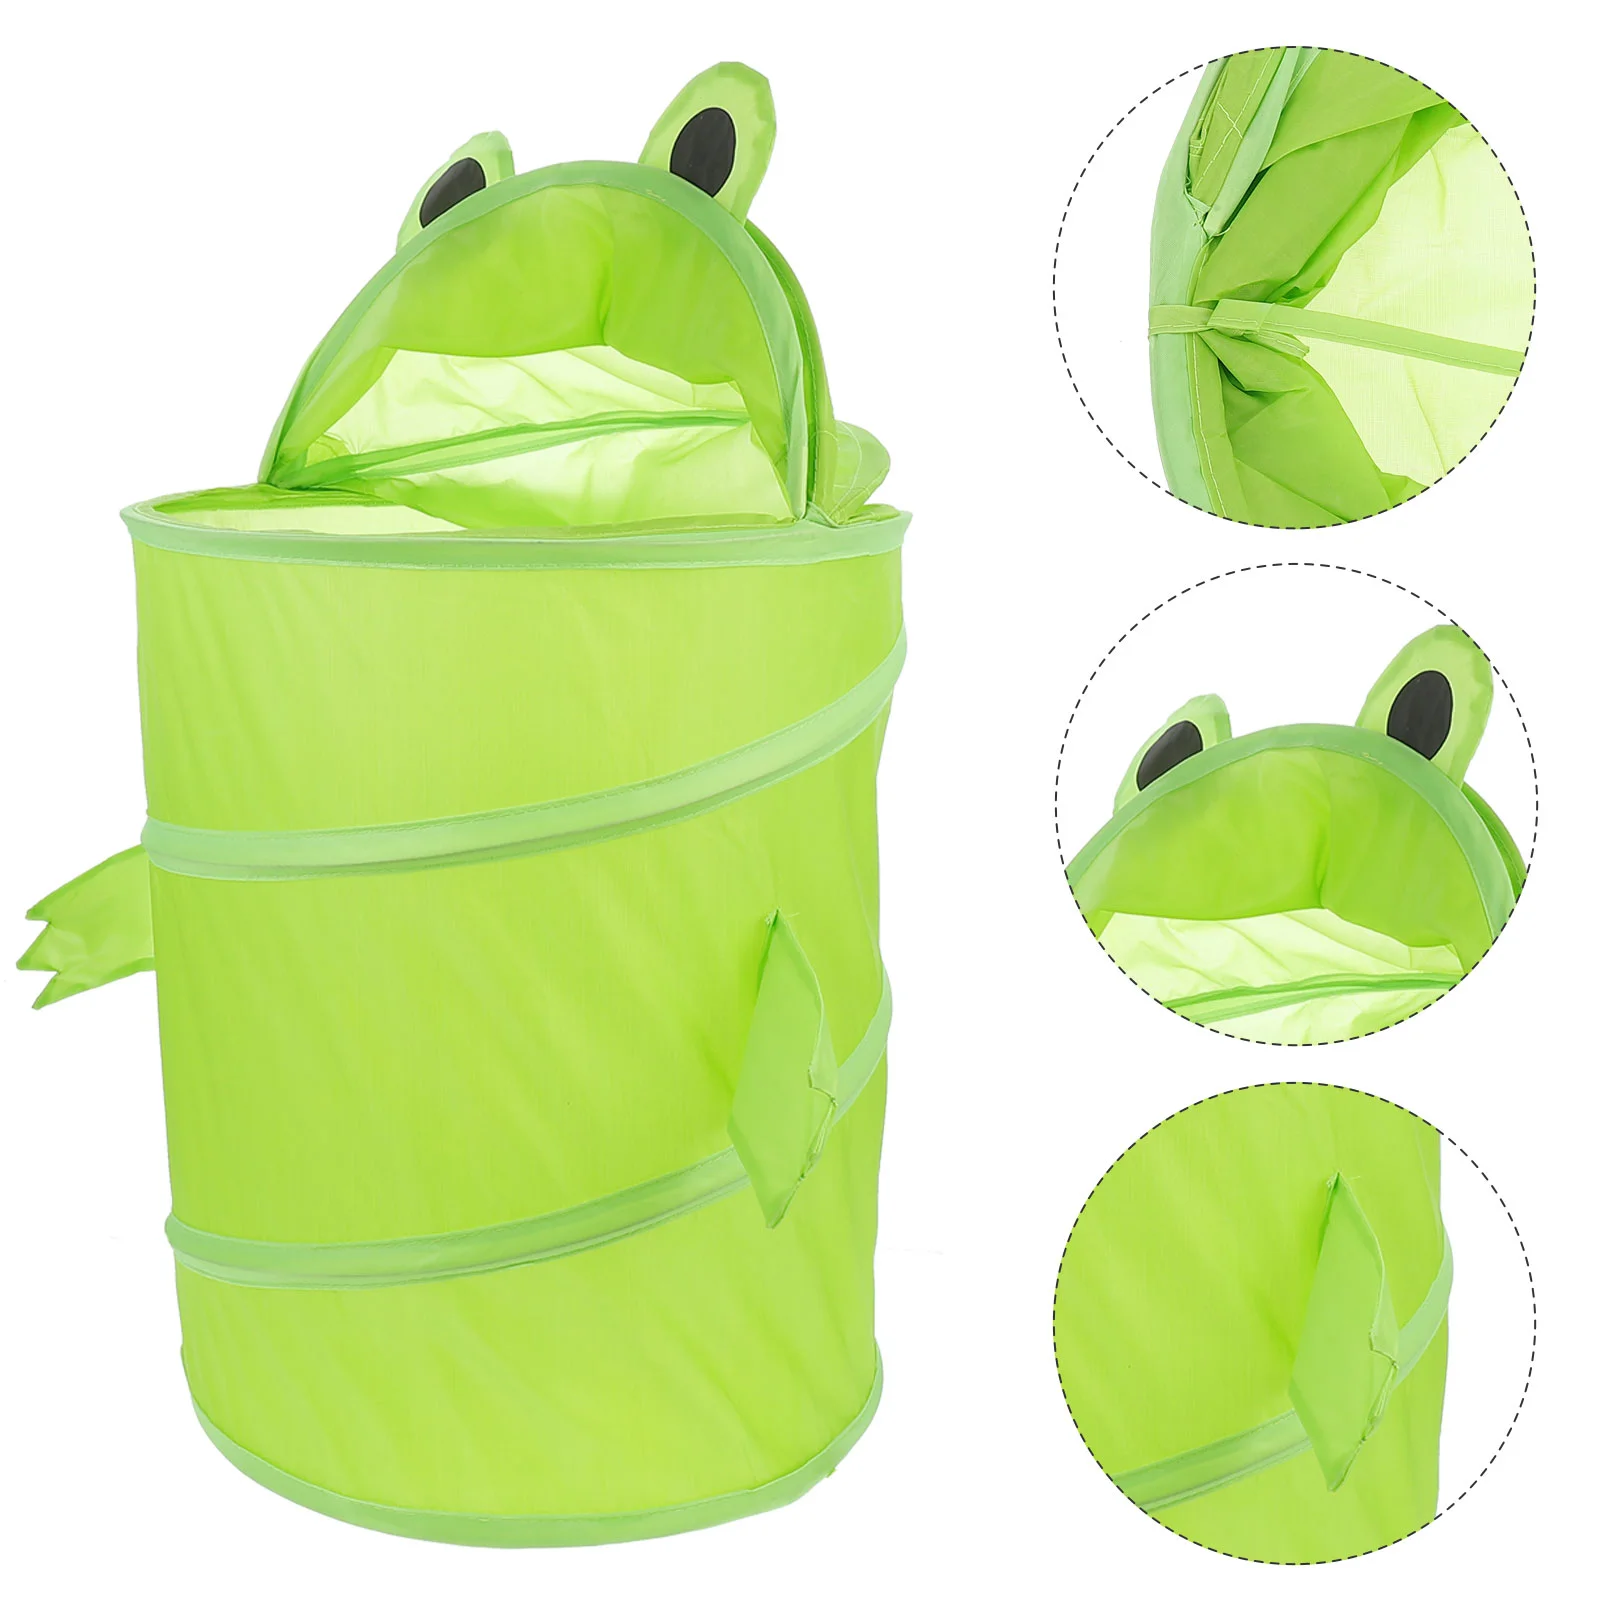 

Basket Laundry Hamper Storage Sundries Organizer Clothes Baskets Toy Foldable Collapsible Mesh Dirty Up Cloth Bucket Kid Bin